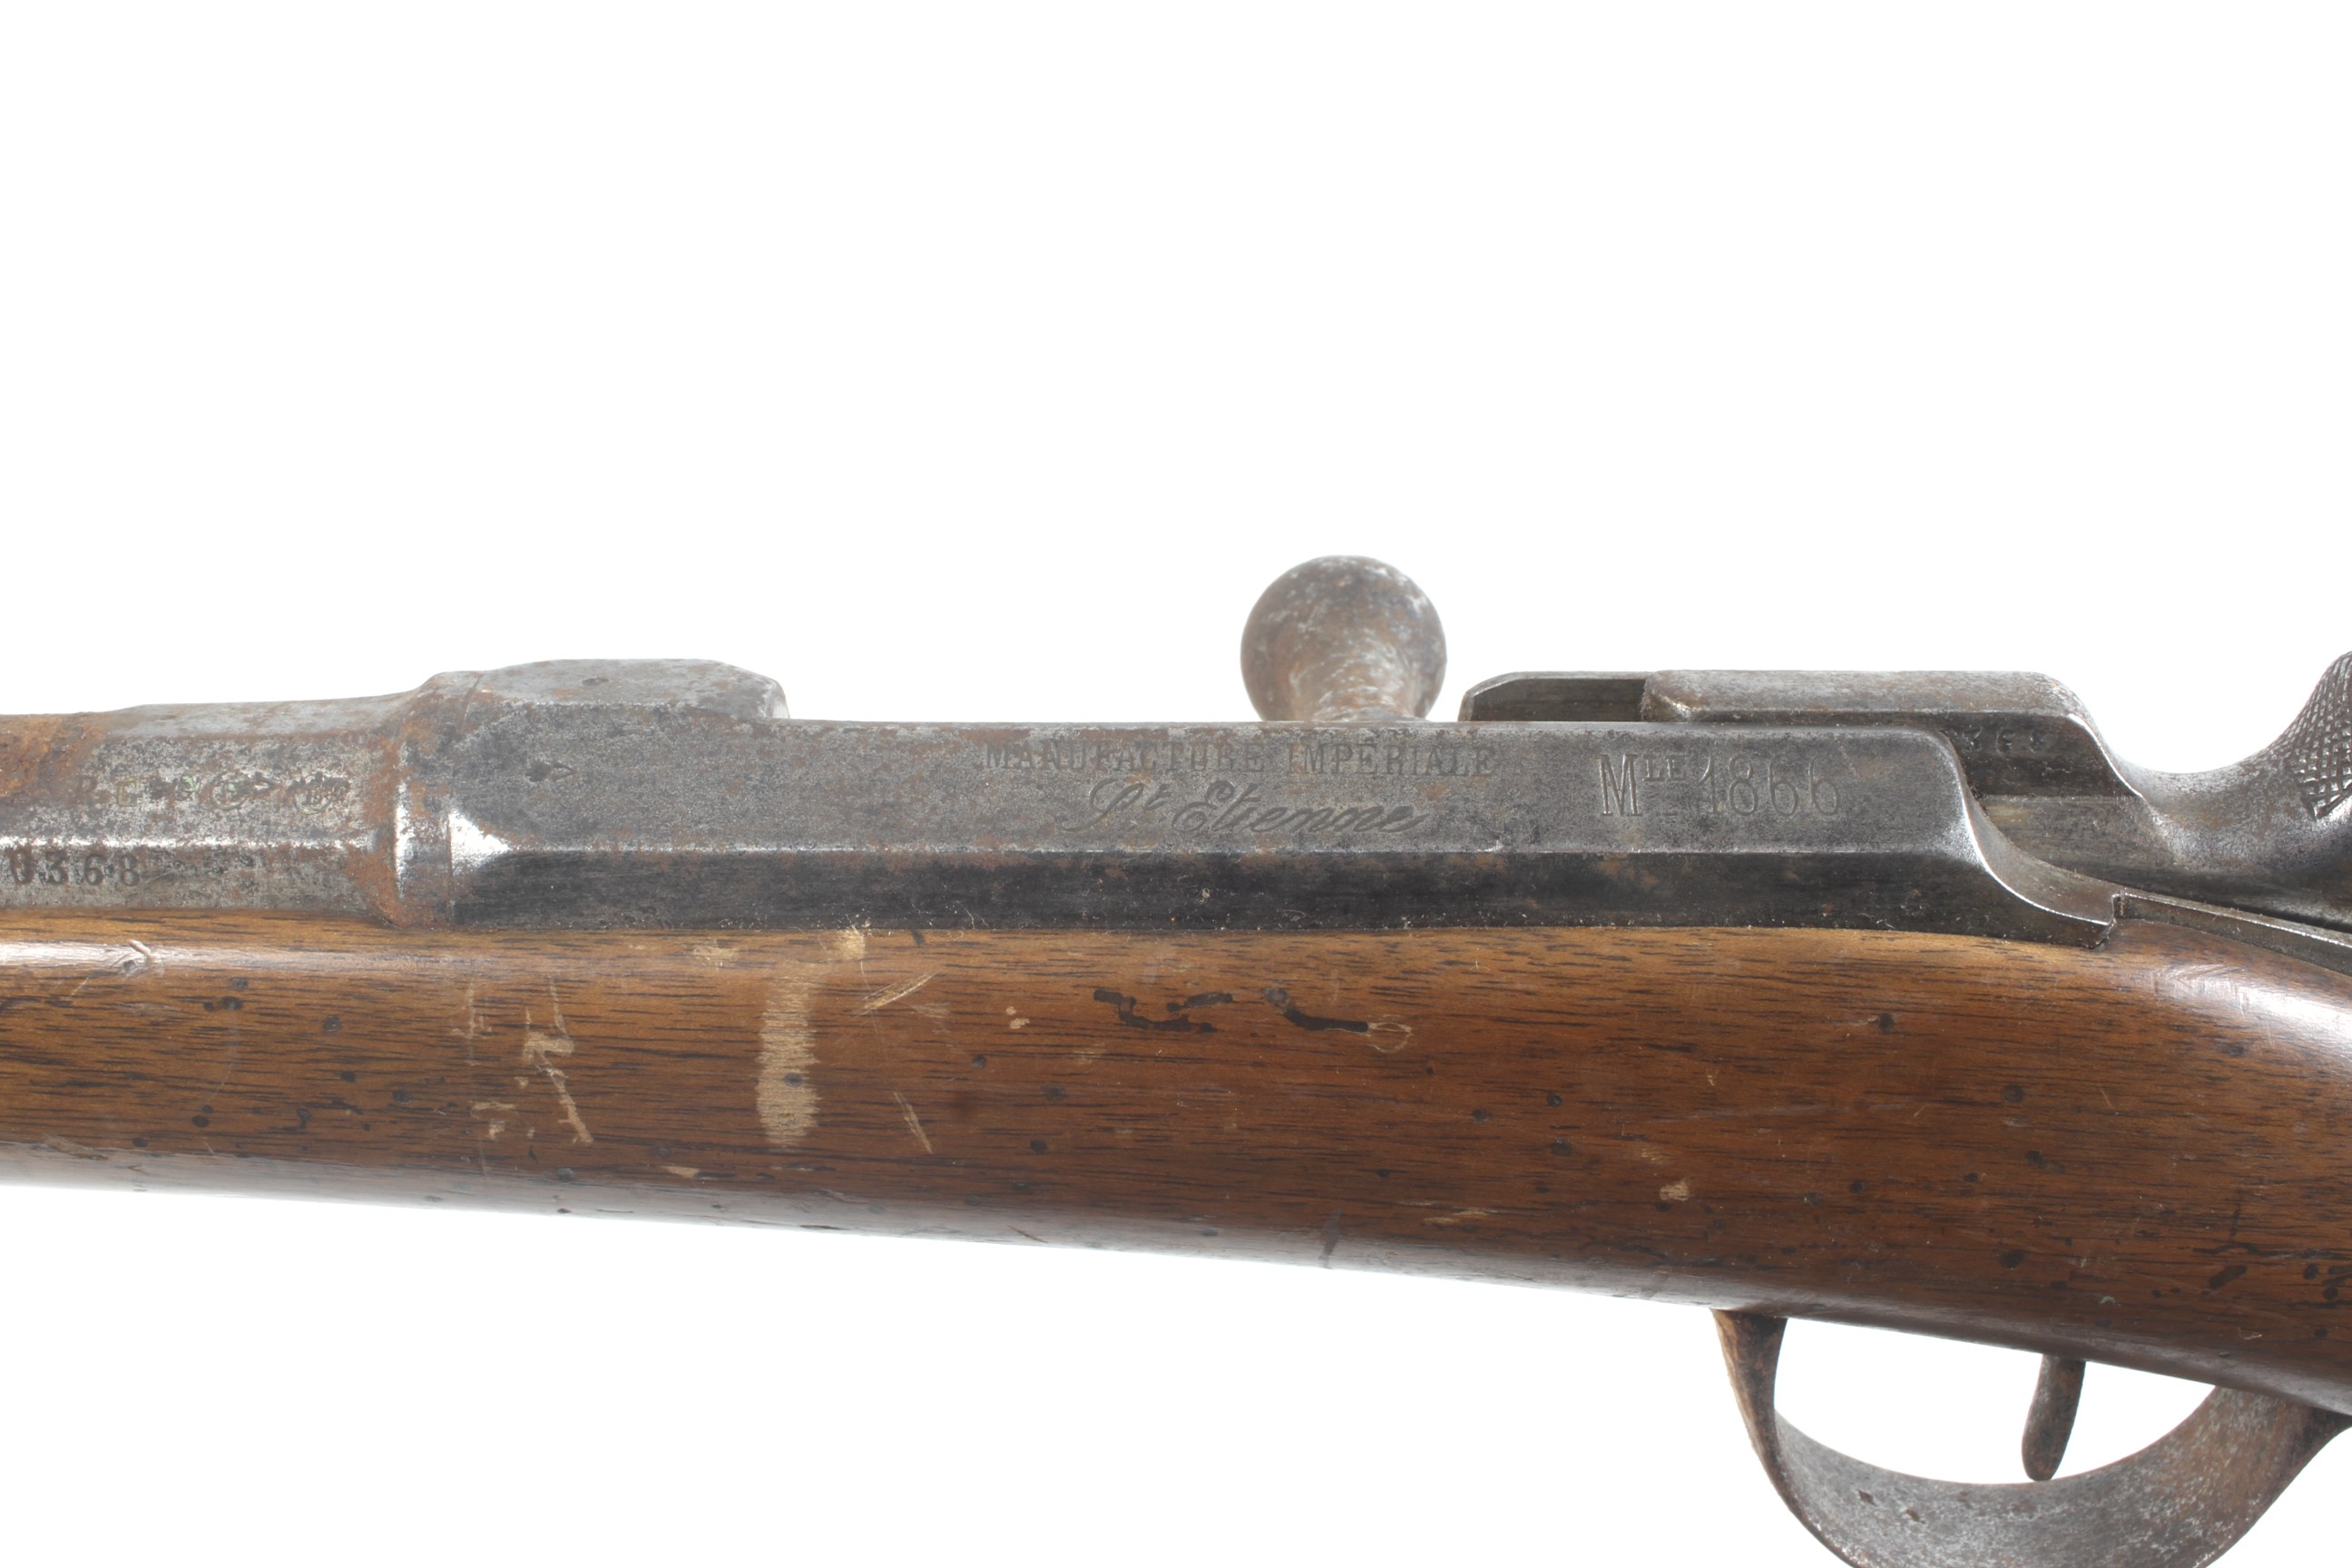 A circa 1920 St Etienne 11mm calibre bolt action rifle. Serial number 20568. - Image 4 of 4